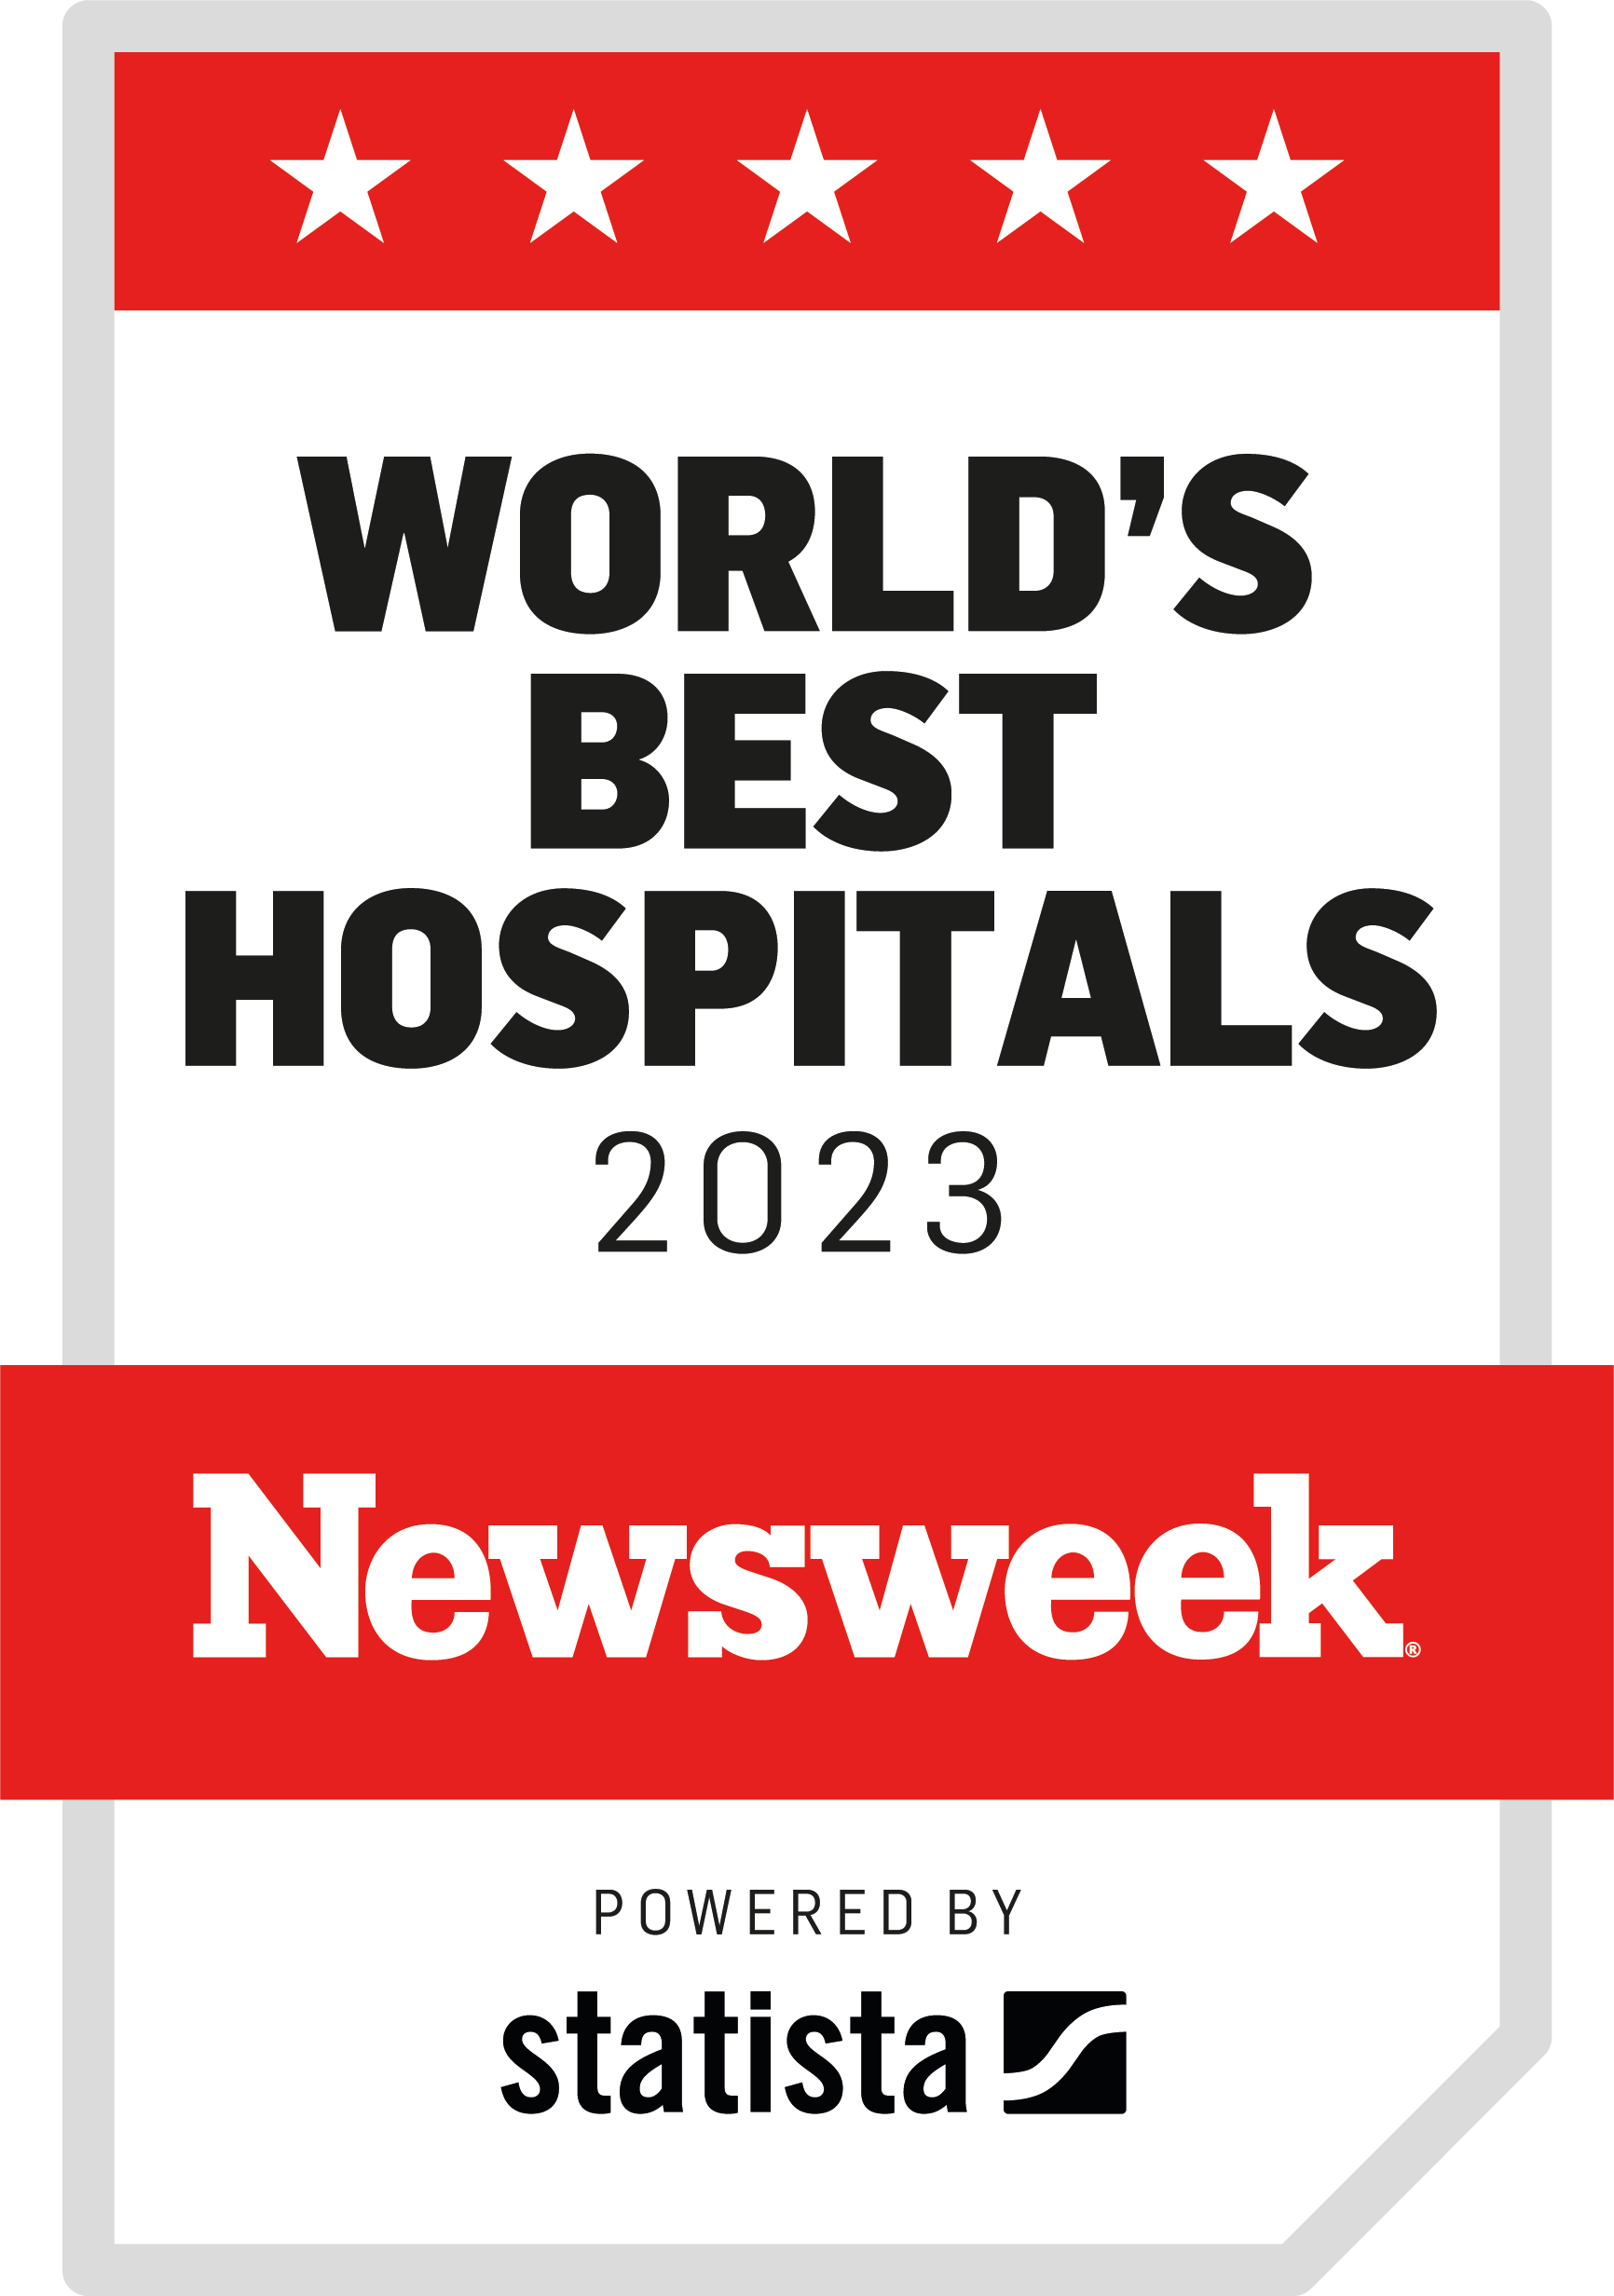 Tgh Named To Newsweeks Worlds Best Hospitals 2022 List And One Of Only 3 Florida Hospitals In